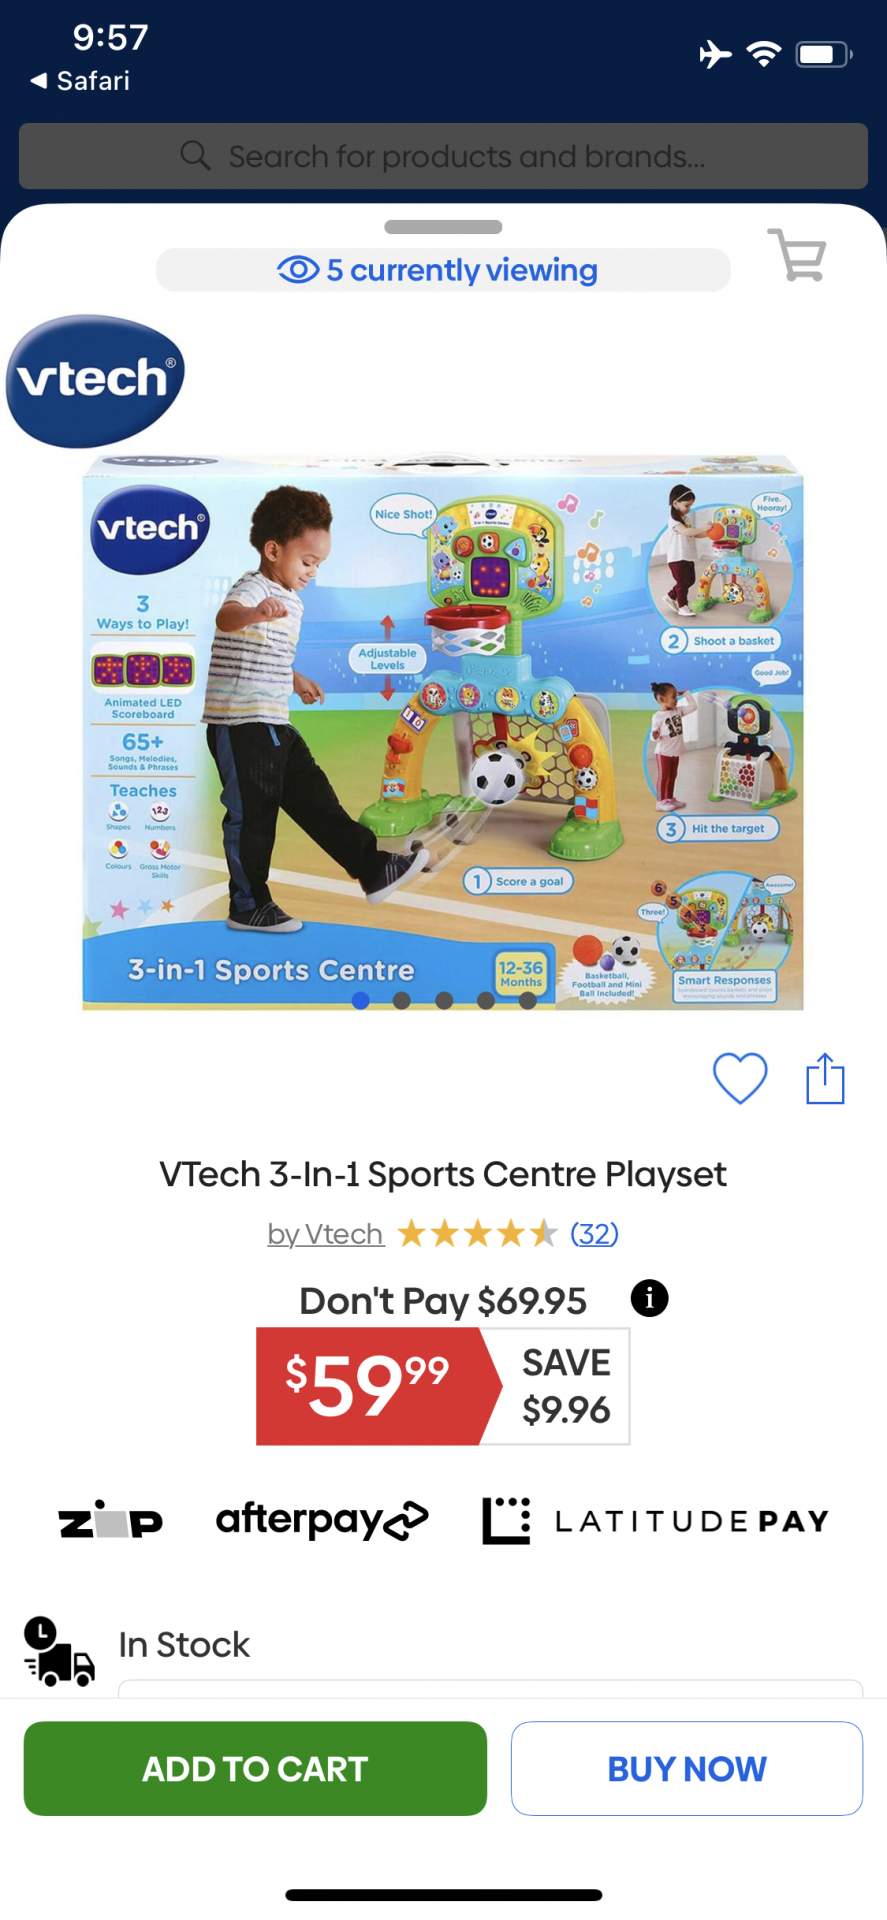 Vtech 3-in-1 sports centre playset